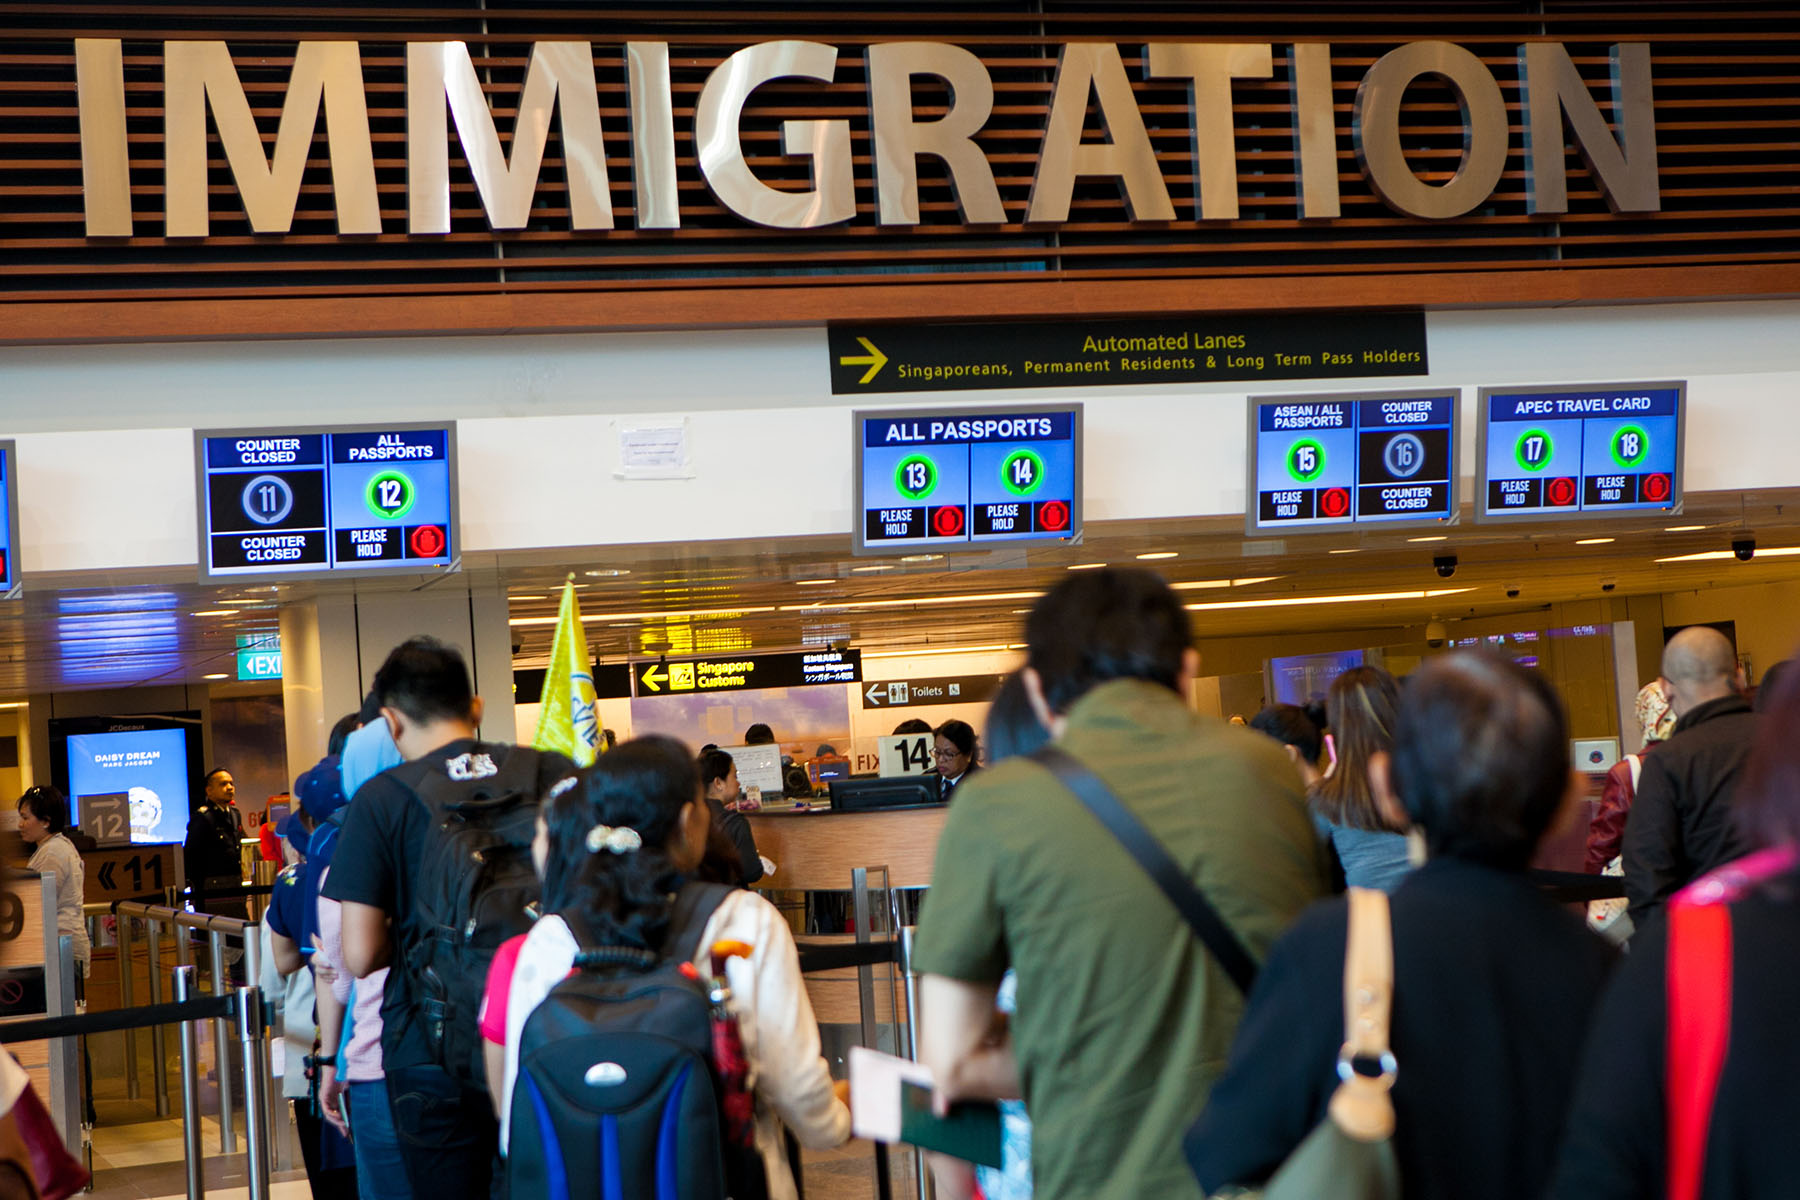 People standing in line in front of an airport immigration desk in Singapore.